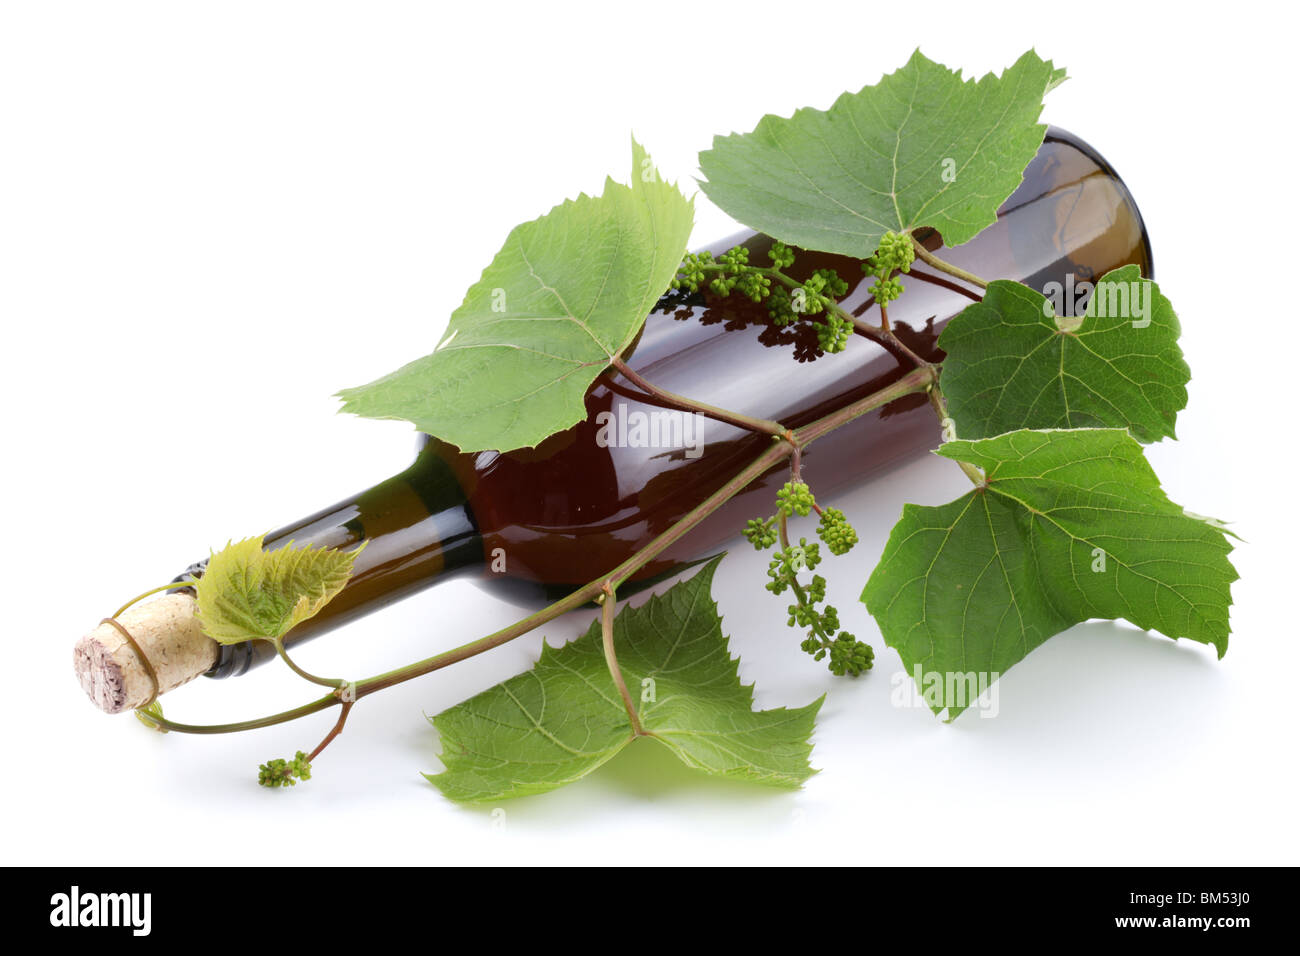 Bottle of wine in the vine on a white background Stock Photo